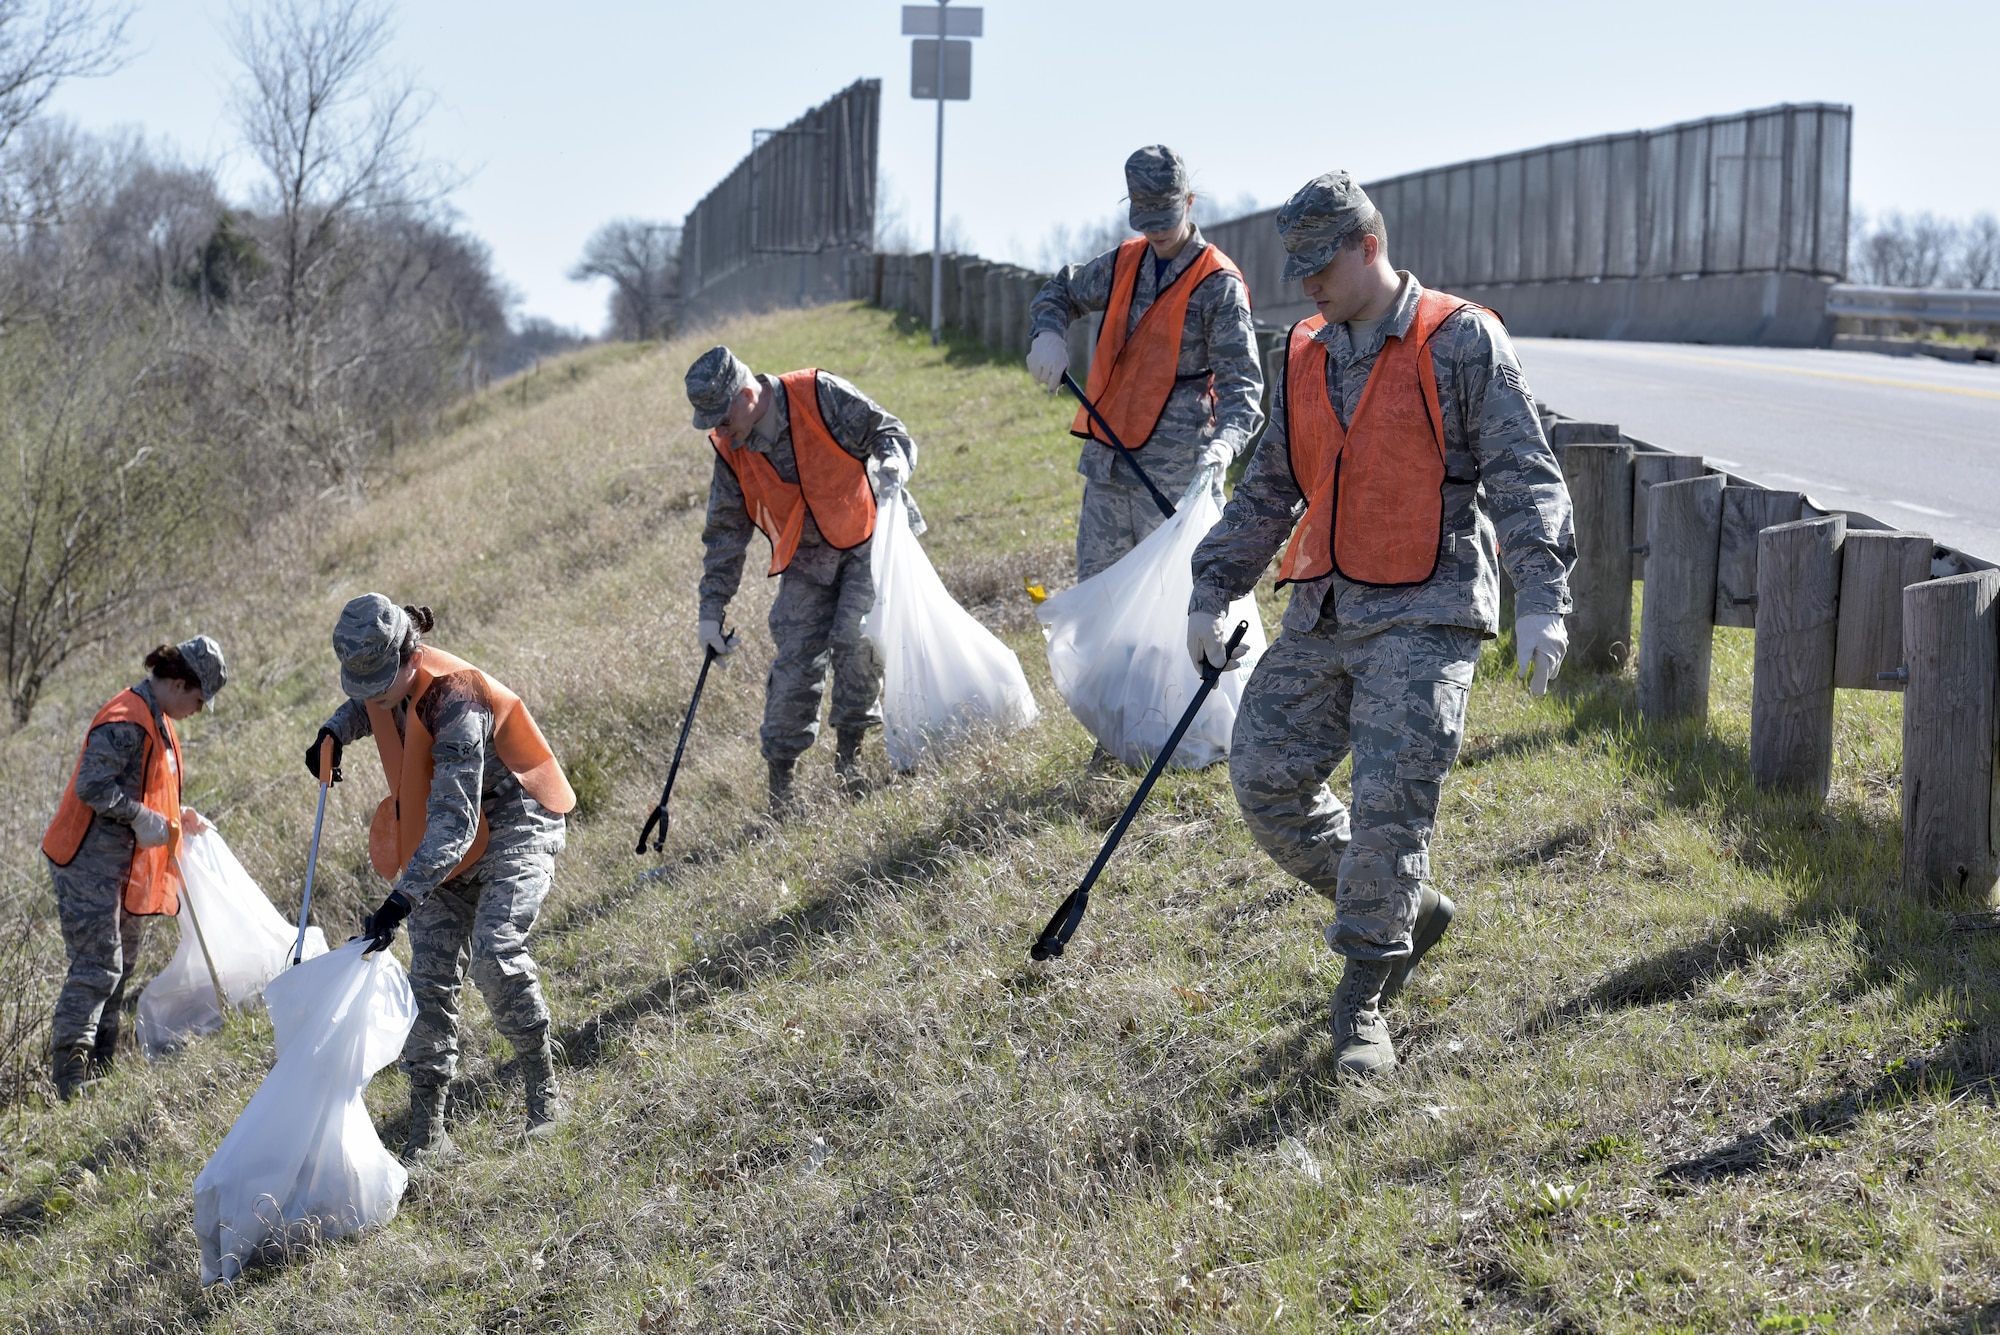 More than 40 Airmen assigned to the 180th Fighter Wing, Ohio Air National Guard, collected 57 bags of trash during the wing’s annual roadside clean-up efforts April 8, 2017, in Swanton, Ohio. The 180FW established a partnership with Keep Toledo/Lucas County Beautiful Adopt-A-Road program more than 20 years ago when the wing officially adopted the five mile stretch of road in March, 1997. Boasting a long tradition of supporting our surrounding communities and throughout Northwest Ohio, 180FW Airmen are fully integrated into our local communities and are invested in the safety and quality of life within those communities, they are dedicated to giving back to those communities who provide the foundational support to our missions, our Airmen and their families.